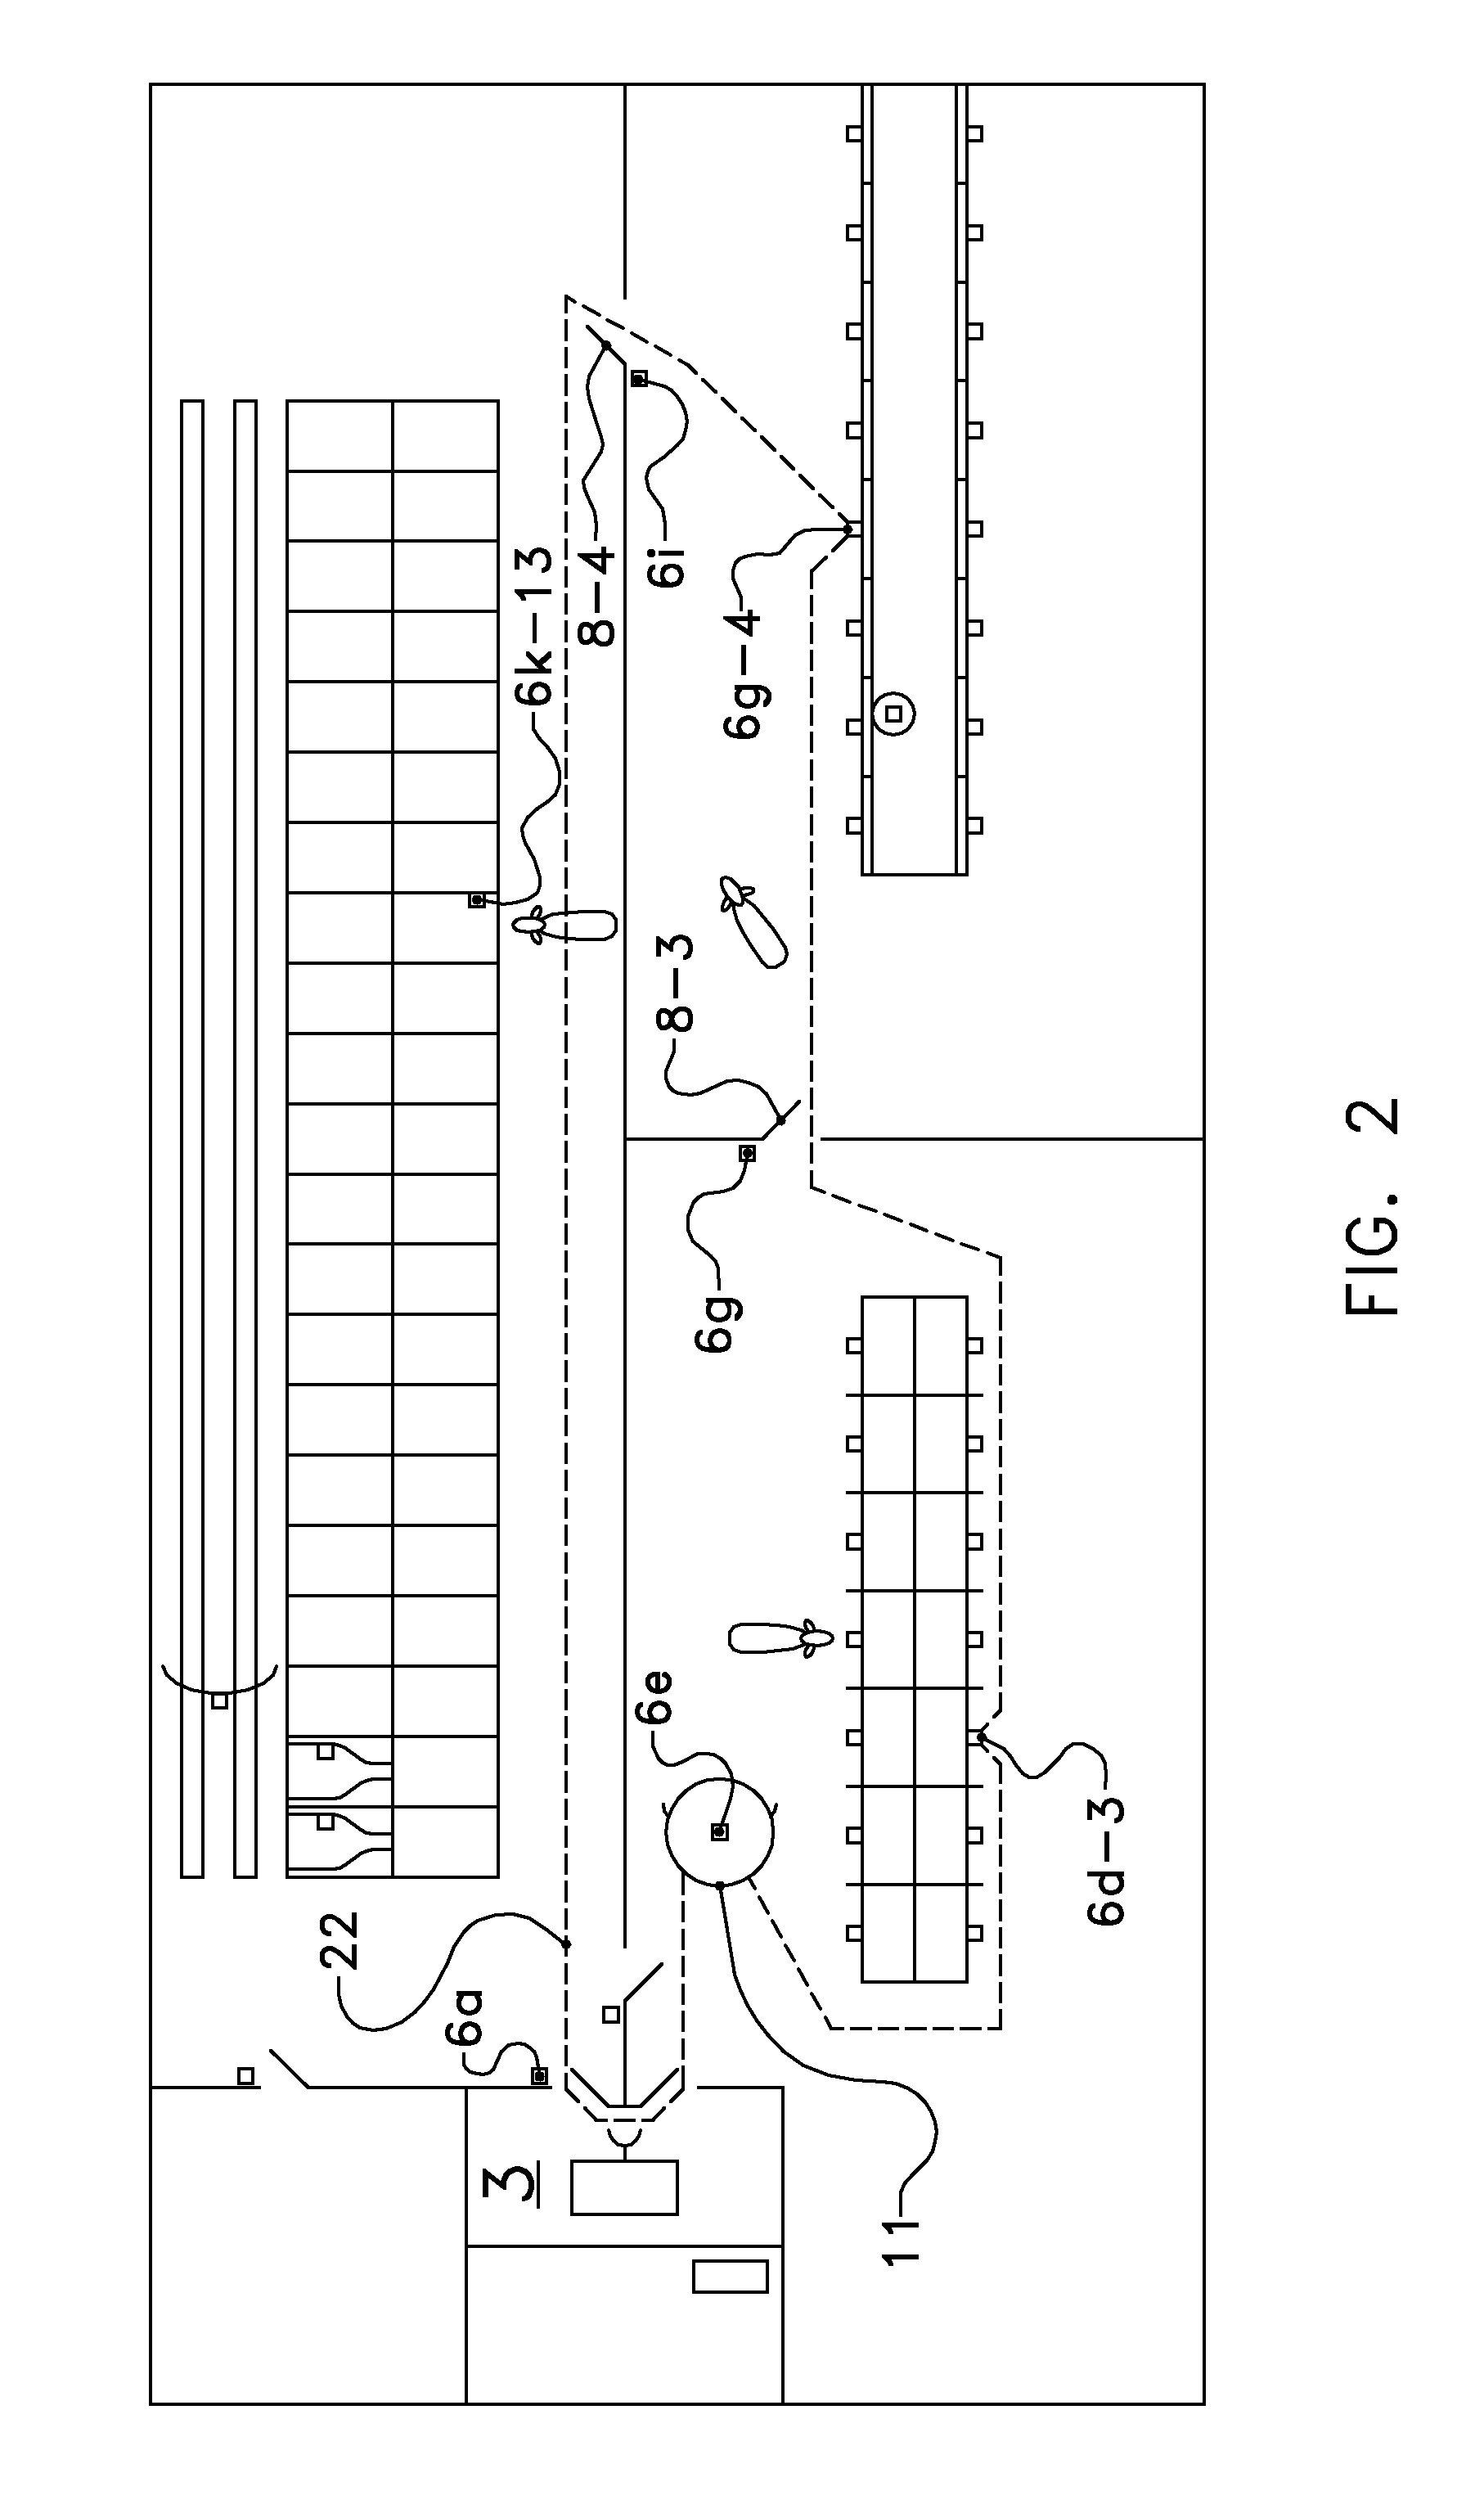 System and method for automatically determining animal position and animal activity